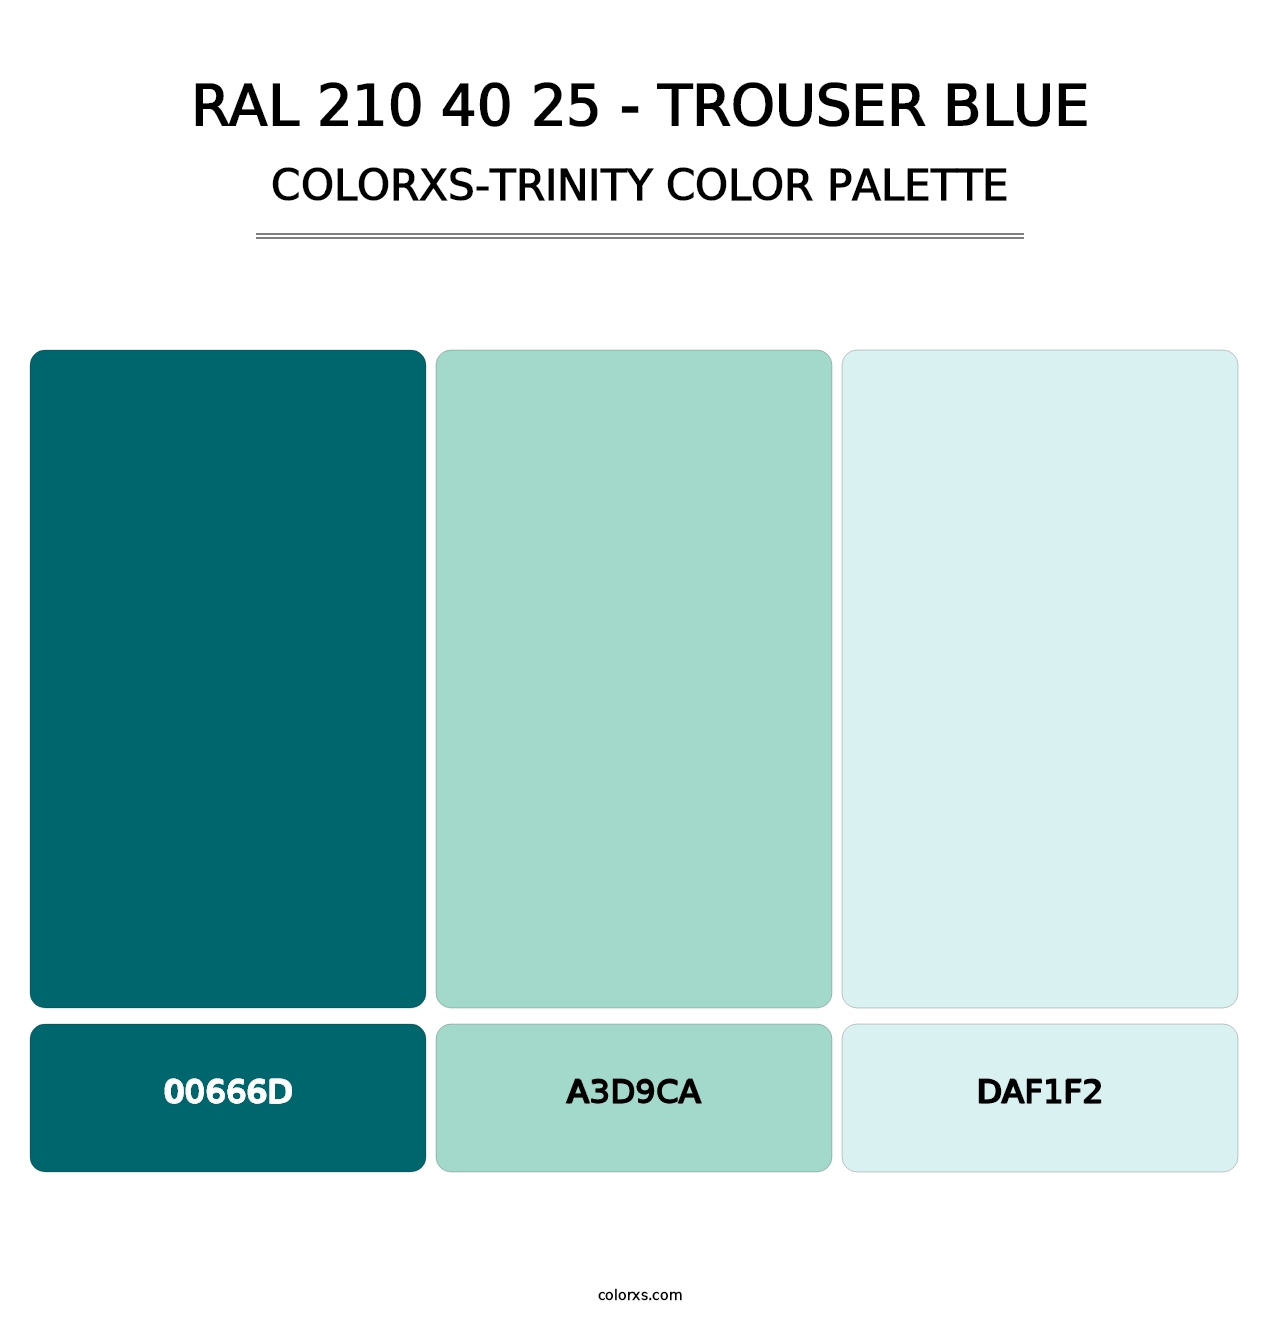 RAL 210 40 25 - Trouser Blue - Colorxs Trinity Palette